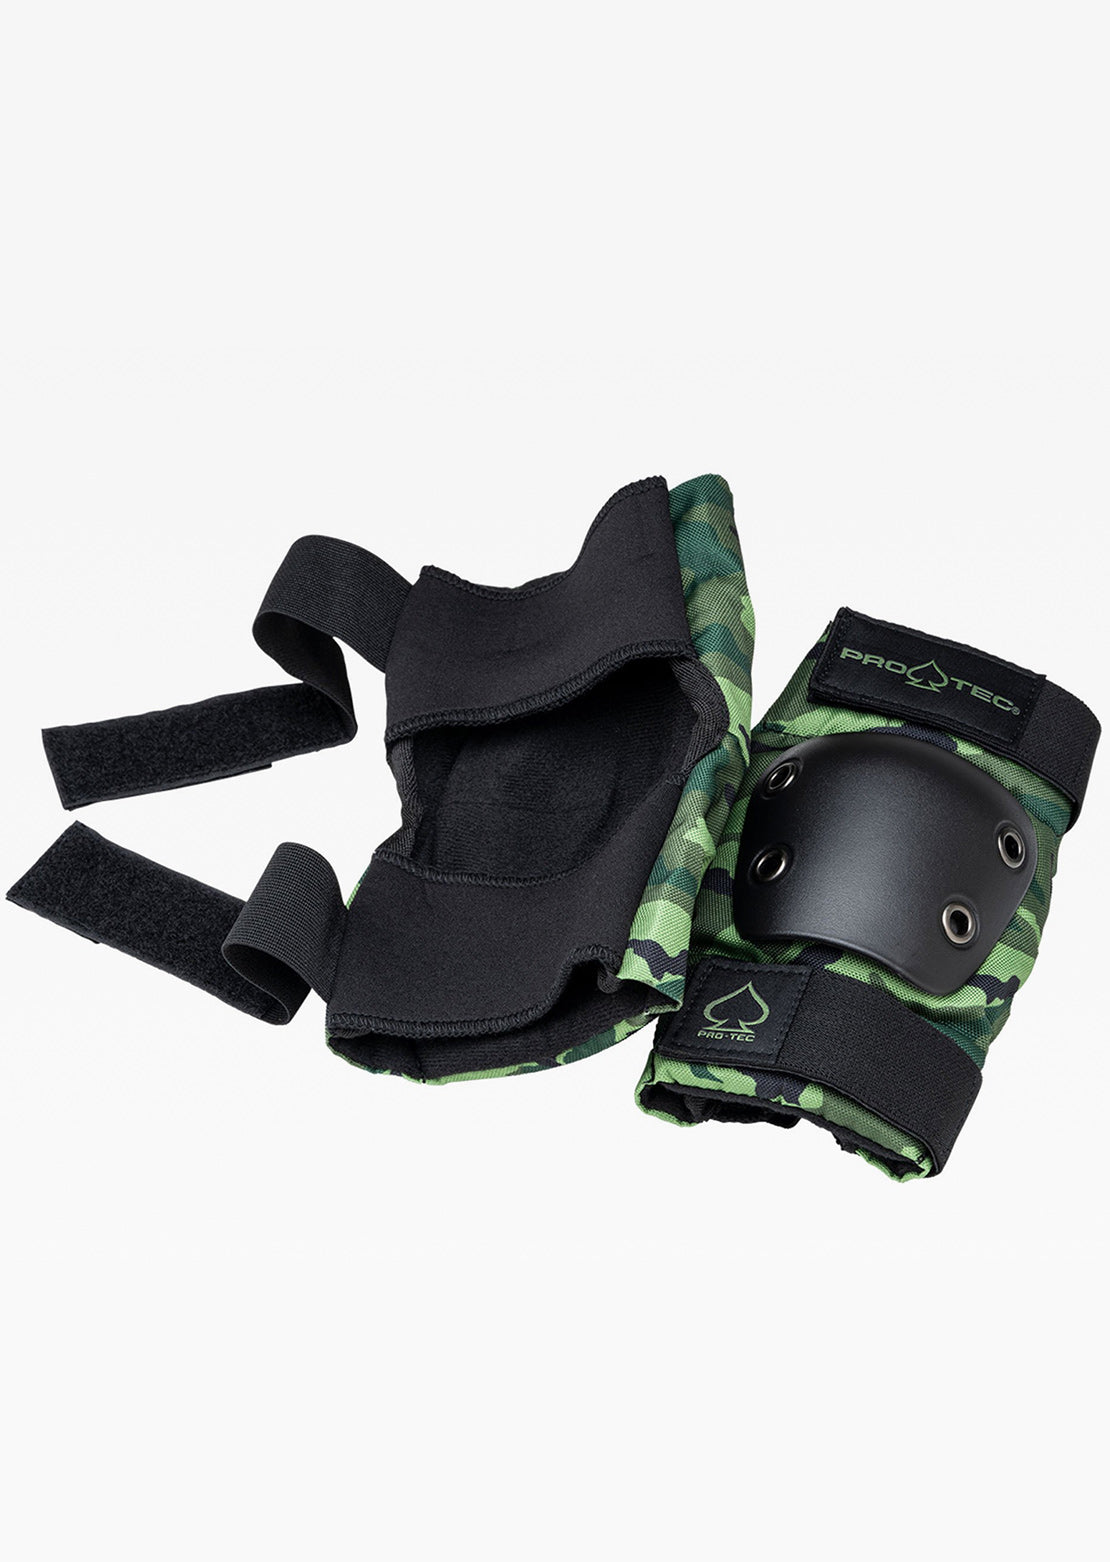 Pro-Tec Junior Street Gear 3 Pack Pads Protection Camo